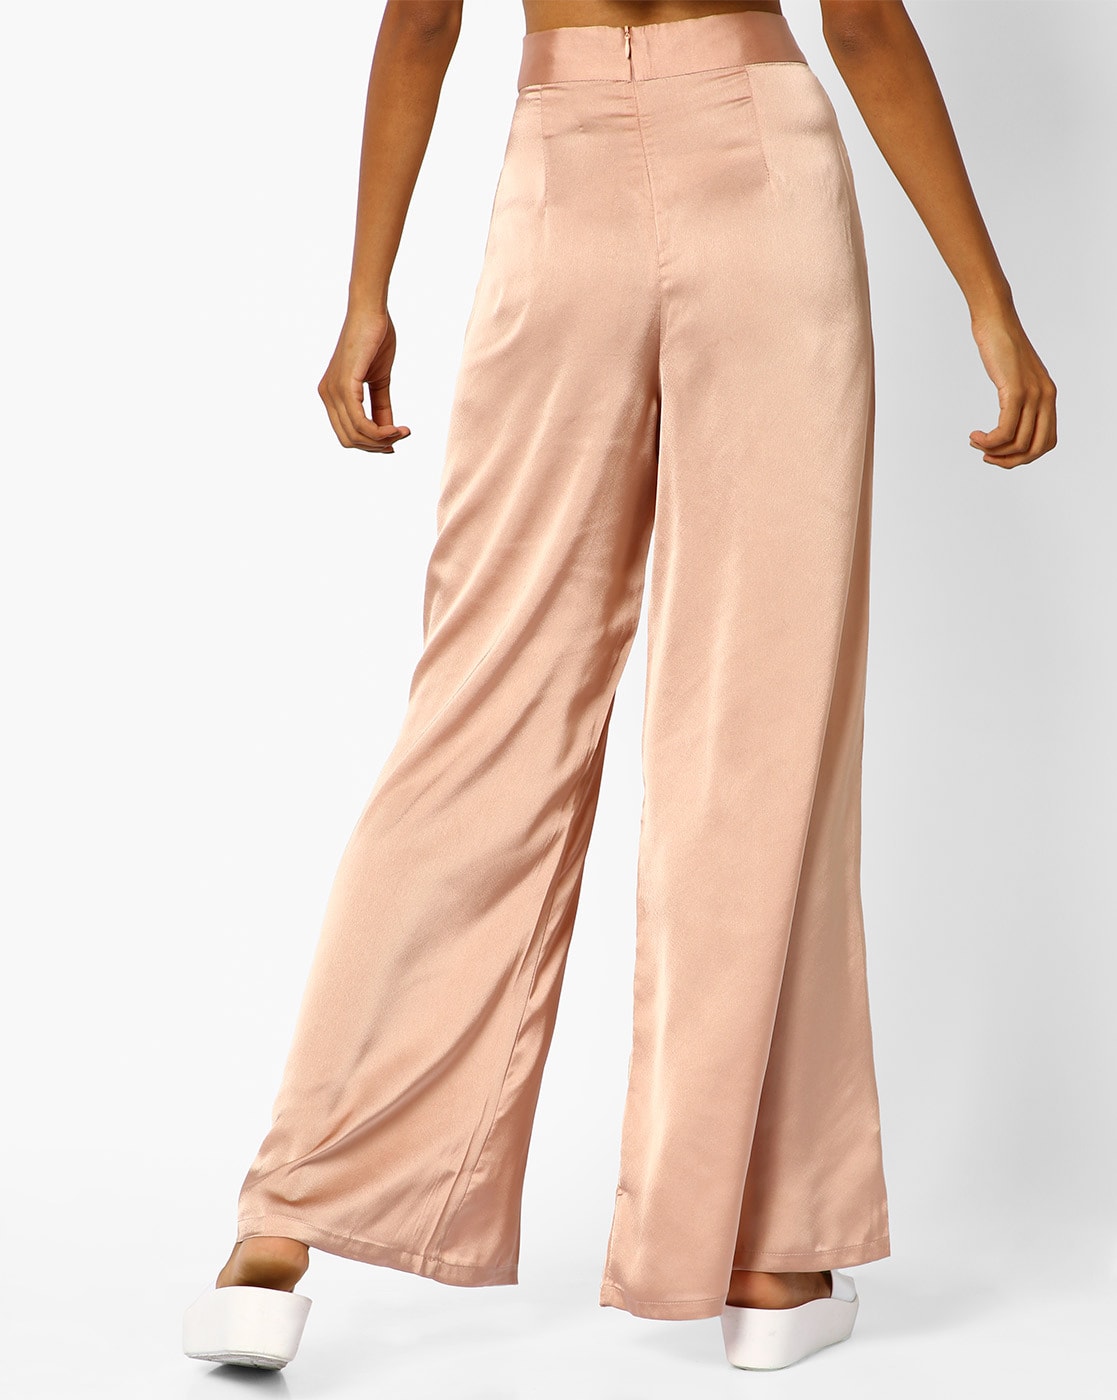 Wholesale moodylime high quality Trouser Women Satin Women Trousers Office  Lady wide leg pants Women From malibabacom